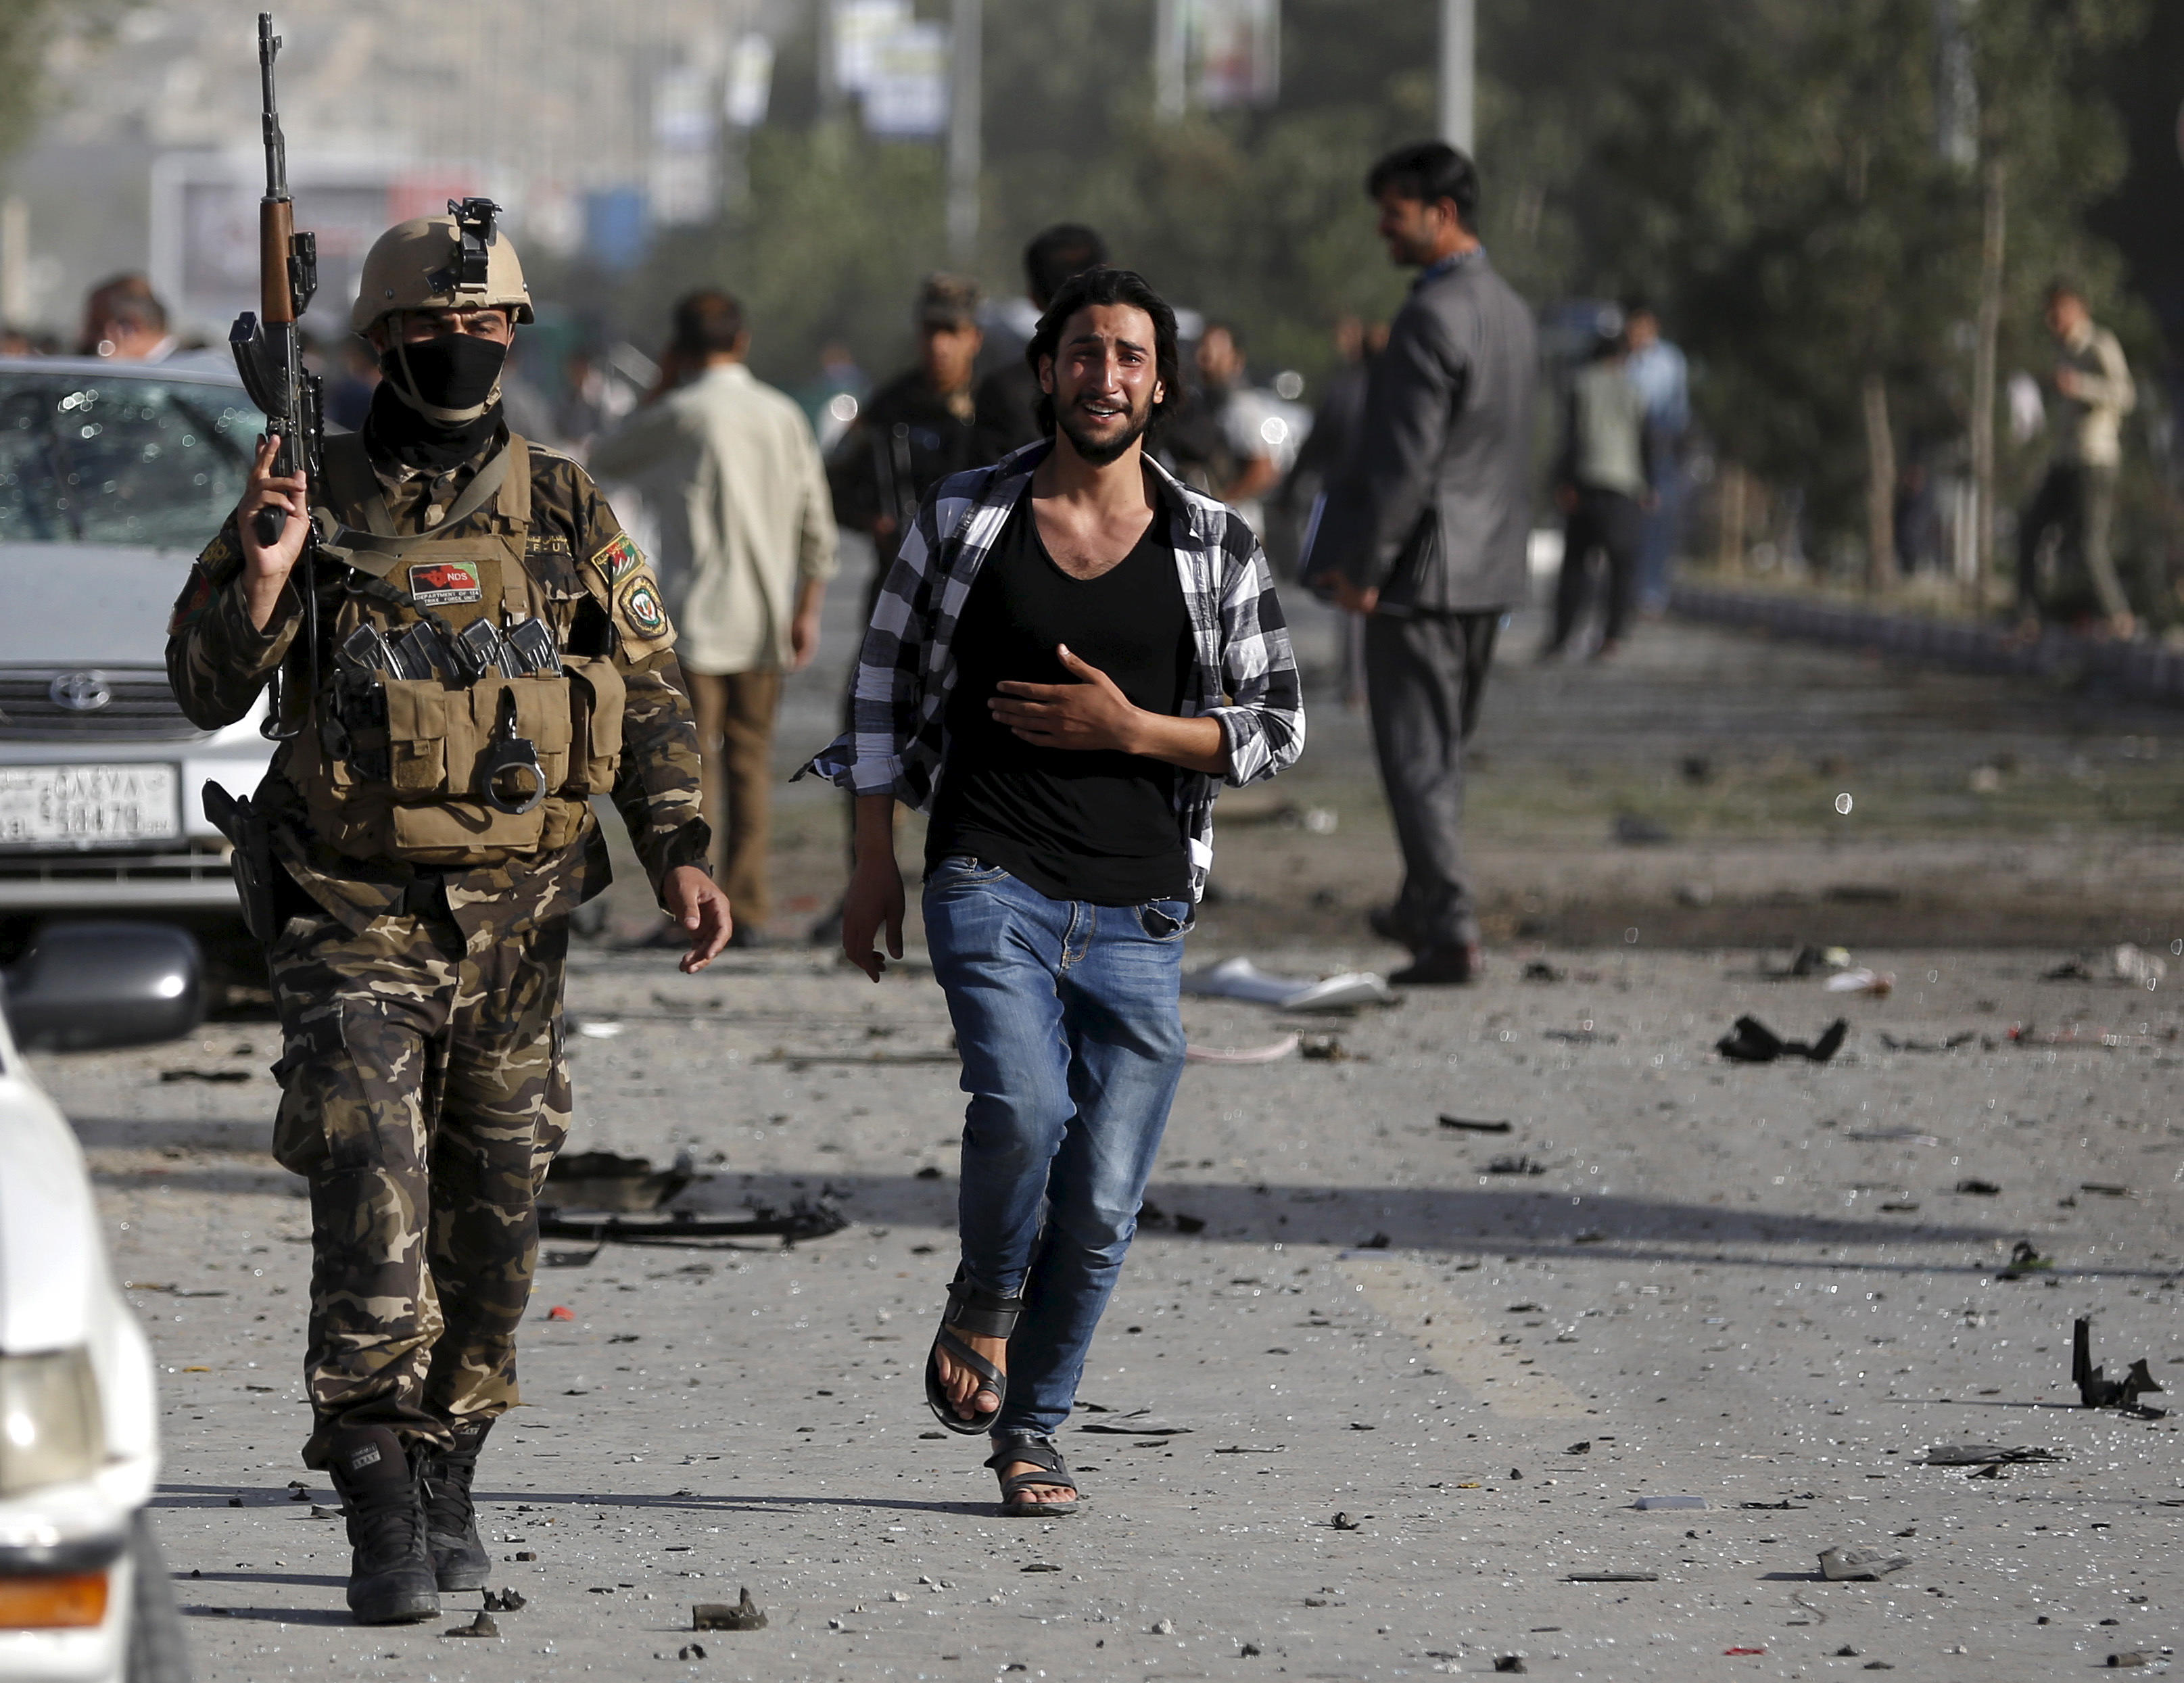 An Afghan man weeps as he runs at the site of a car bomb blast in Kabul, Afghanistan Aug. 22, 2015 (Ahmad Masood—Reuters)